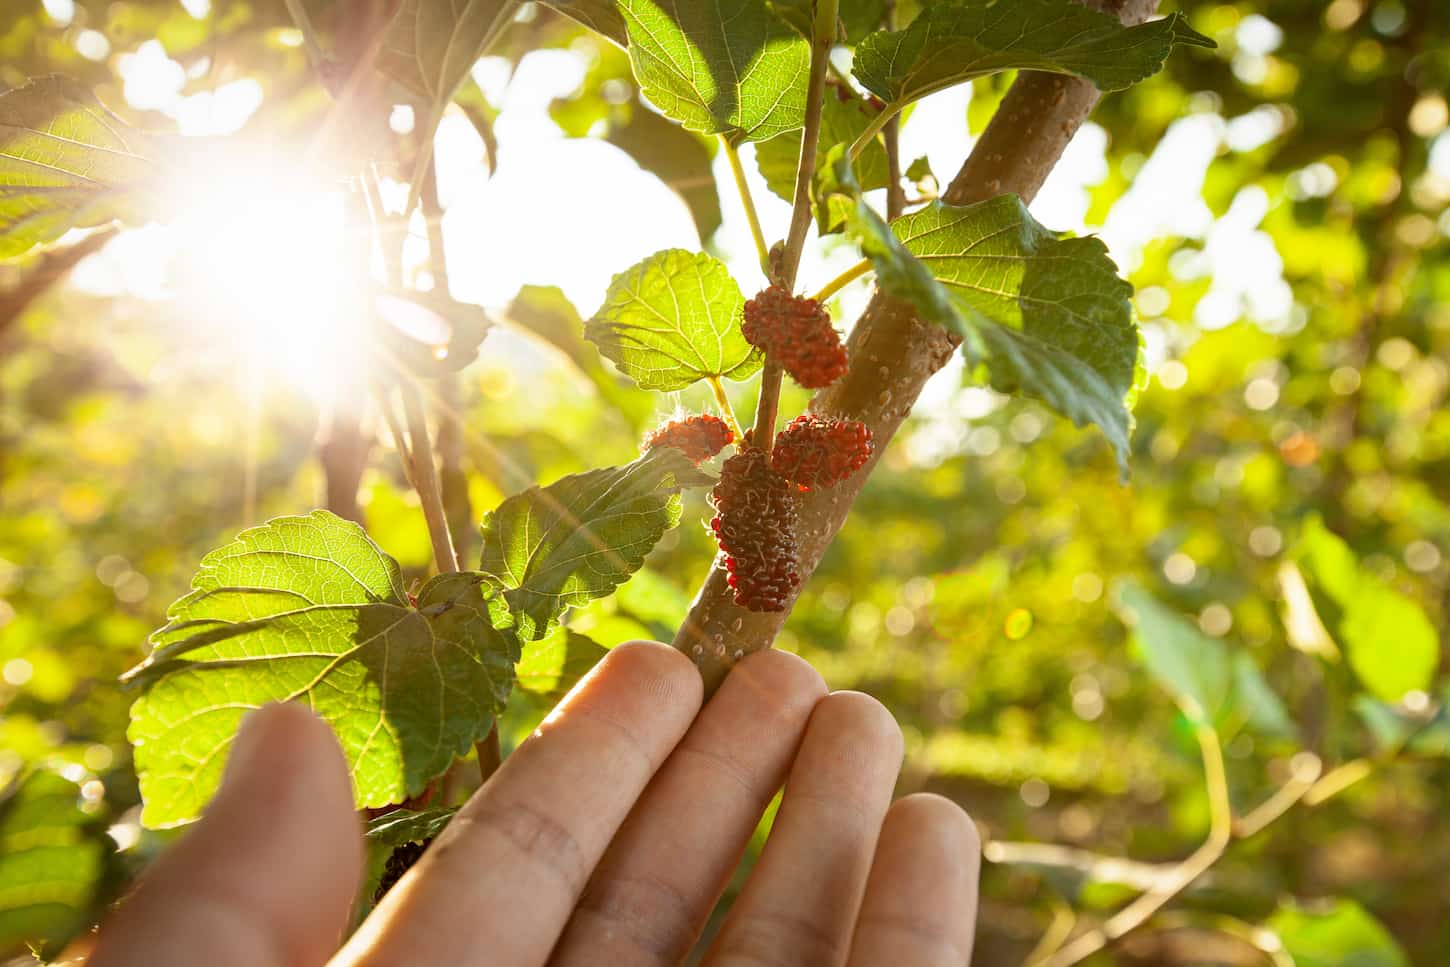 An image of an unknown hand showing fresh mulberries on a tree.